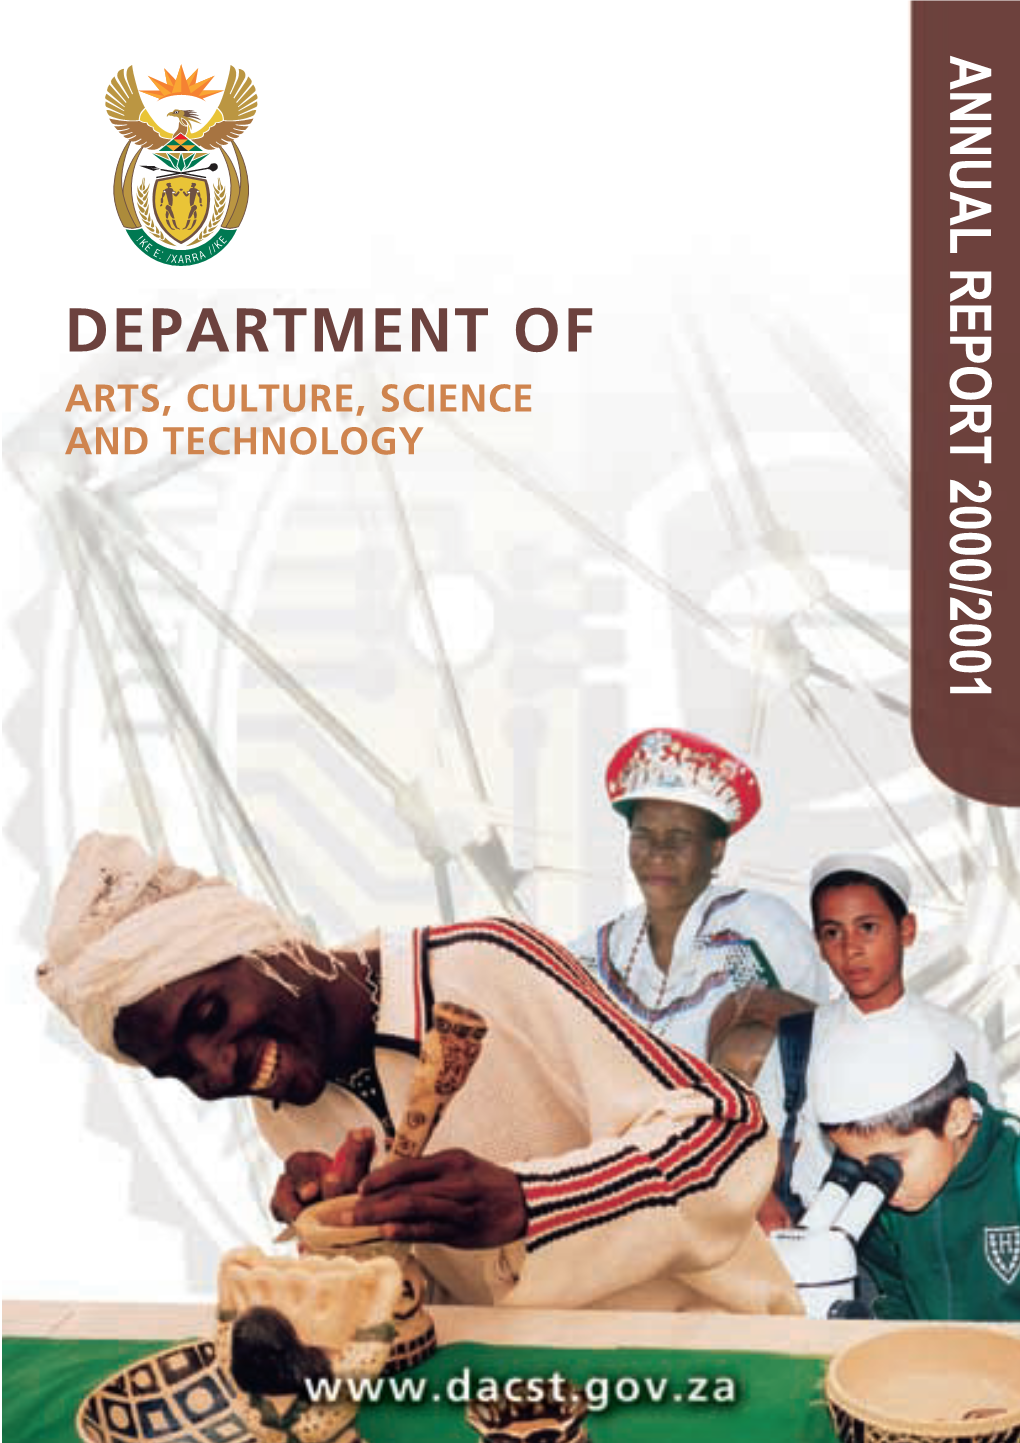 DEPARTMENT of ARTS, CULTURE, SCIENCE and TECHNOLOGY Mission Statement